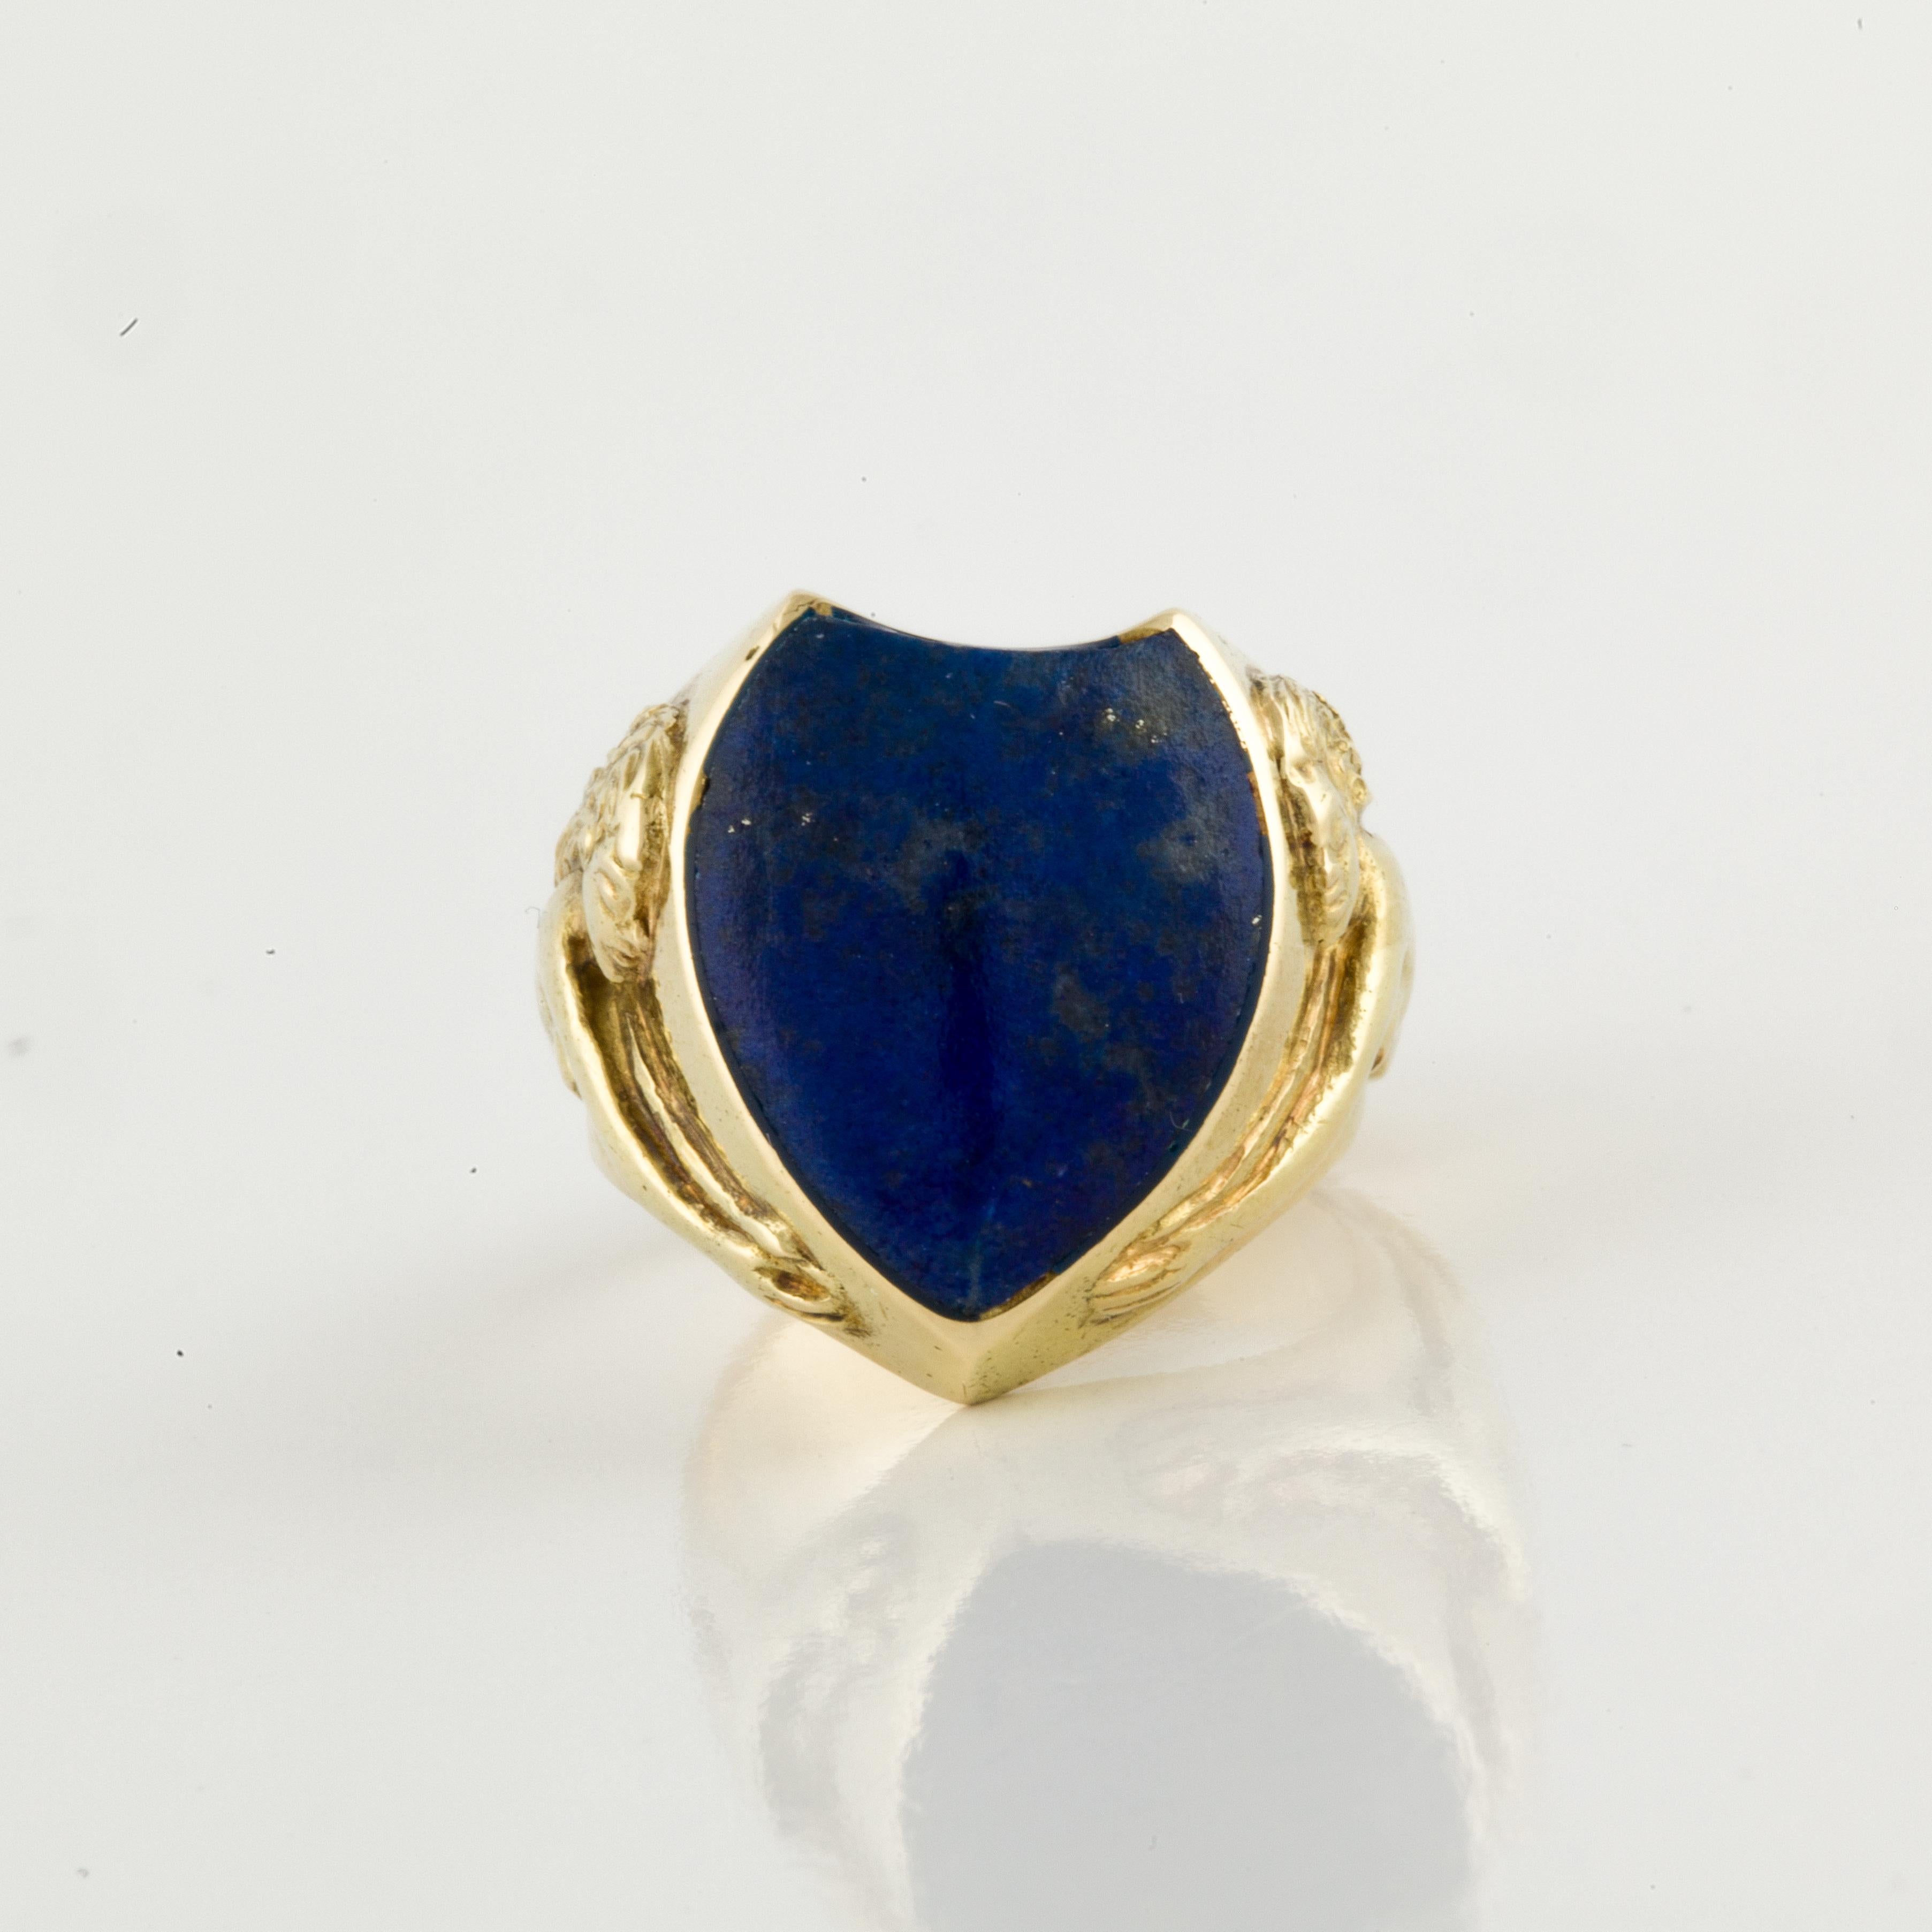 18K yellow gold ring with shield shaped lapis.  On each side of the shank is a female nude with outstretched arms. Ring is currently a size 6.  Presentation area is 3/4 inches by 3/4 inches.